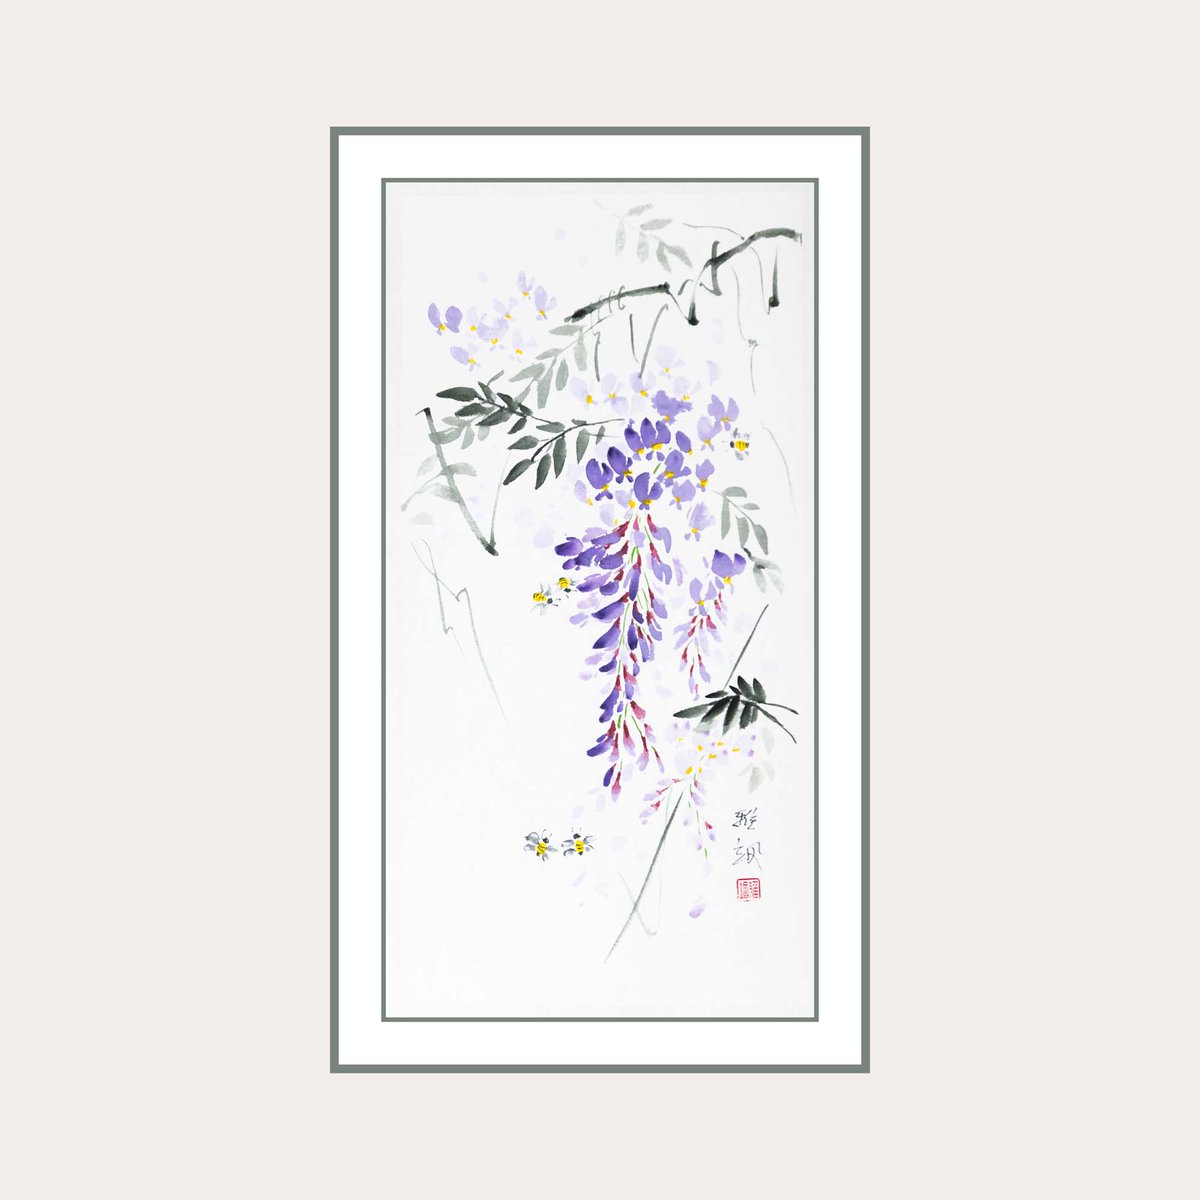 New in my shop: elegant wisteria flowers. Ink and watercolours on rice paper. #japaneseart #chineseart #purpleflowerart #canadianartist #sumie #sumiart #wisteria #canadianartist #EtsySeller #flowerpainting #watercolor #watercolor 
yasamt.etsy.com/listing/171691…